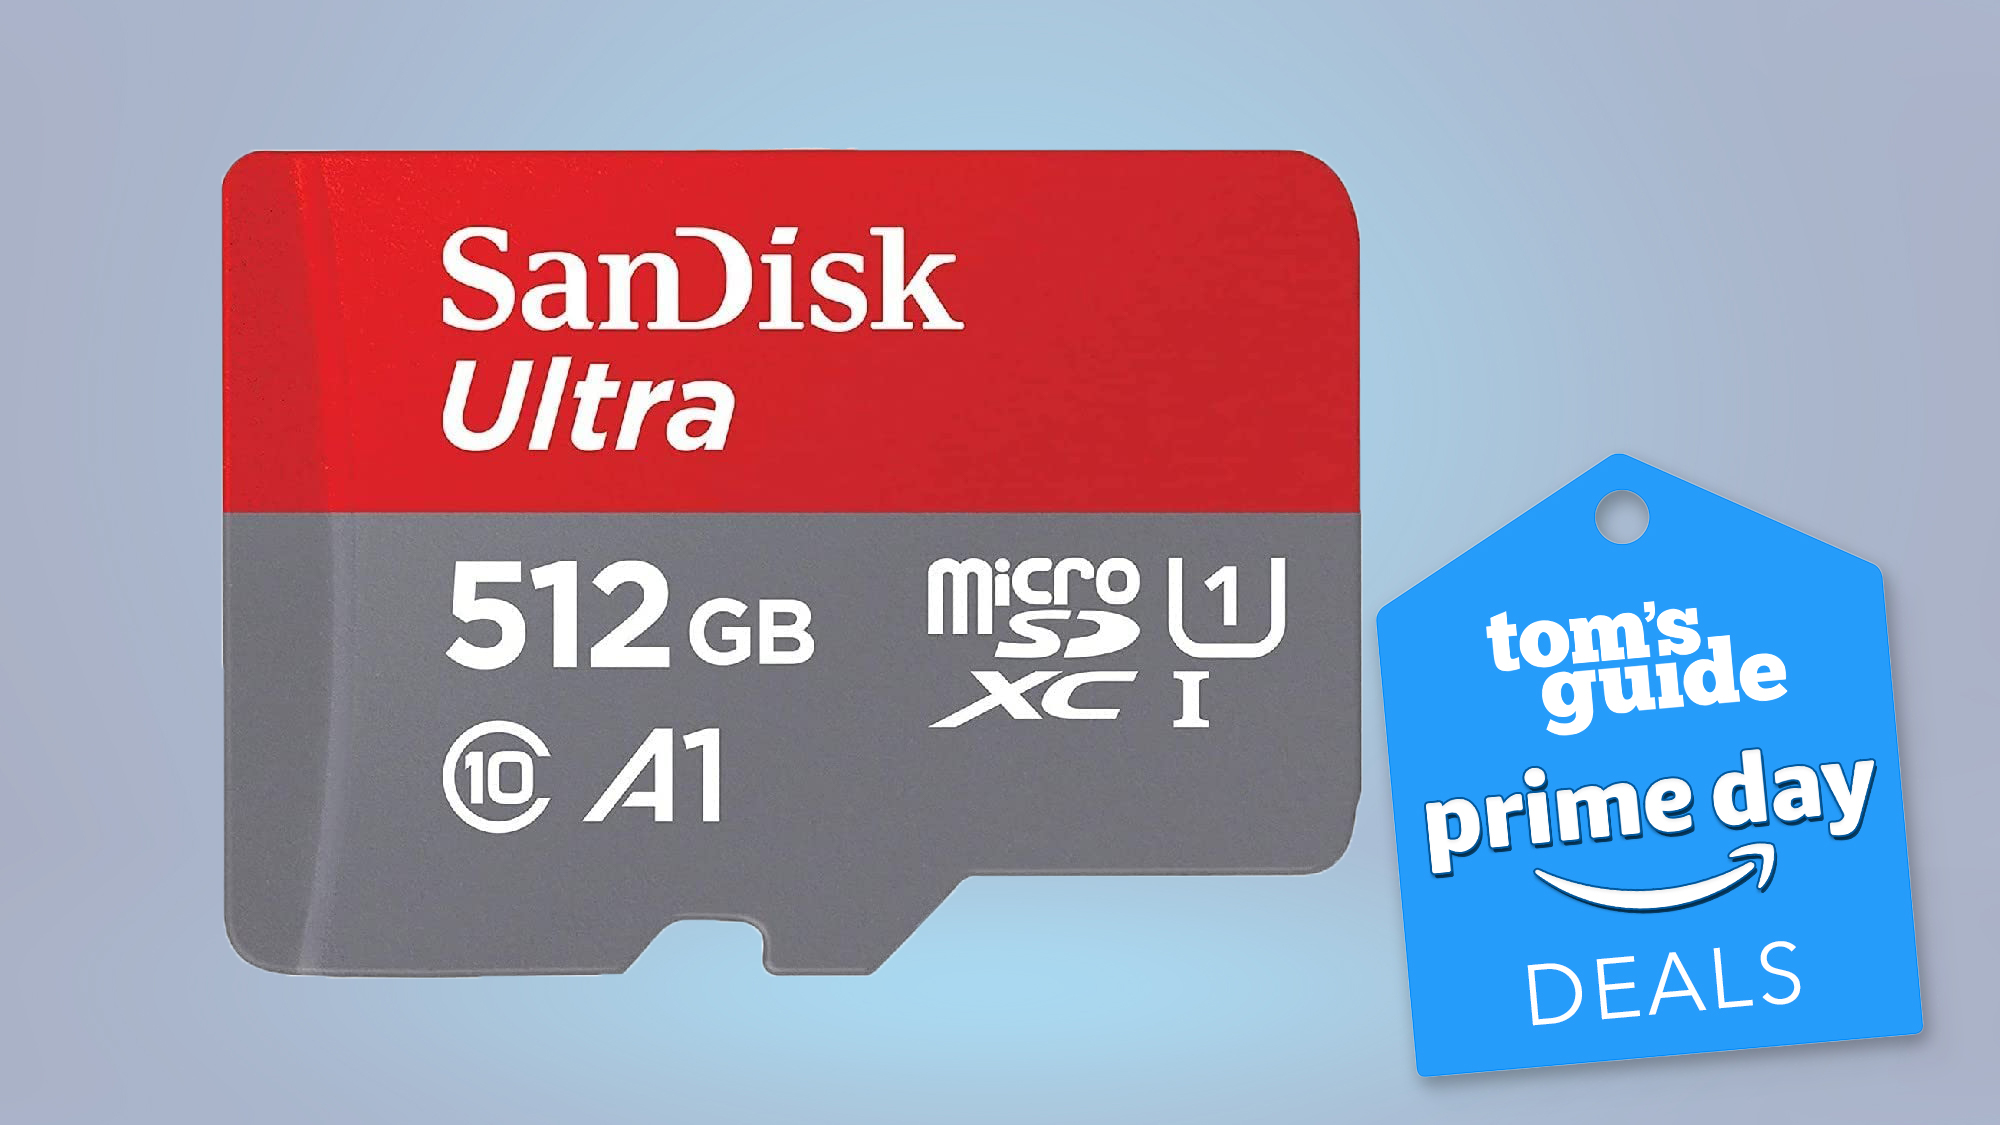 A SanDisk Ultra MicroSD card with a TG Prime Day badge